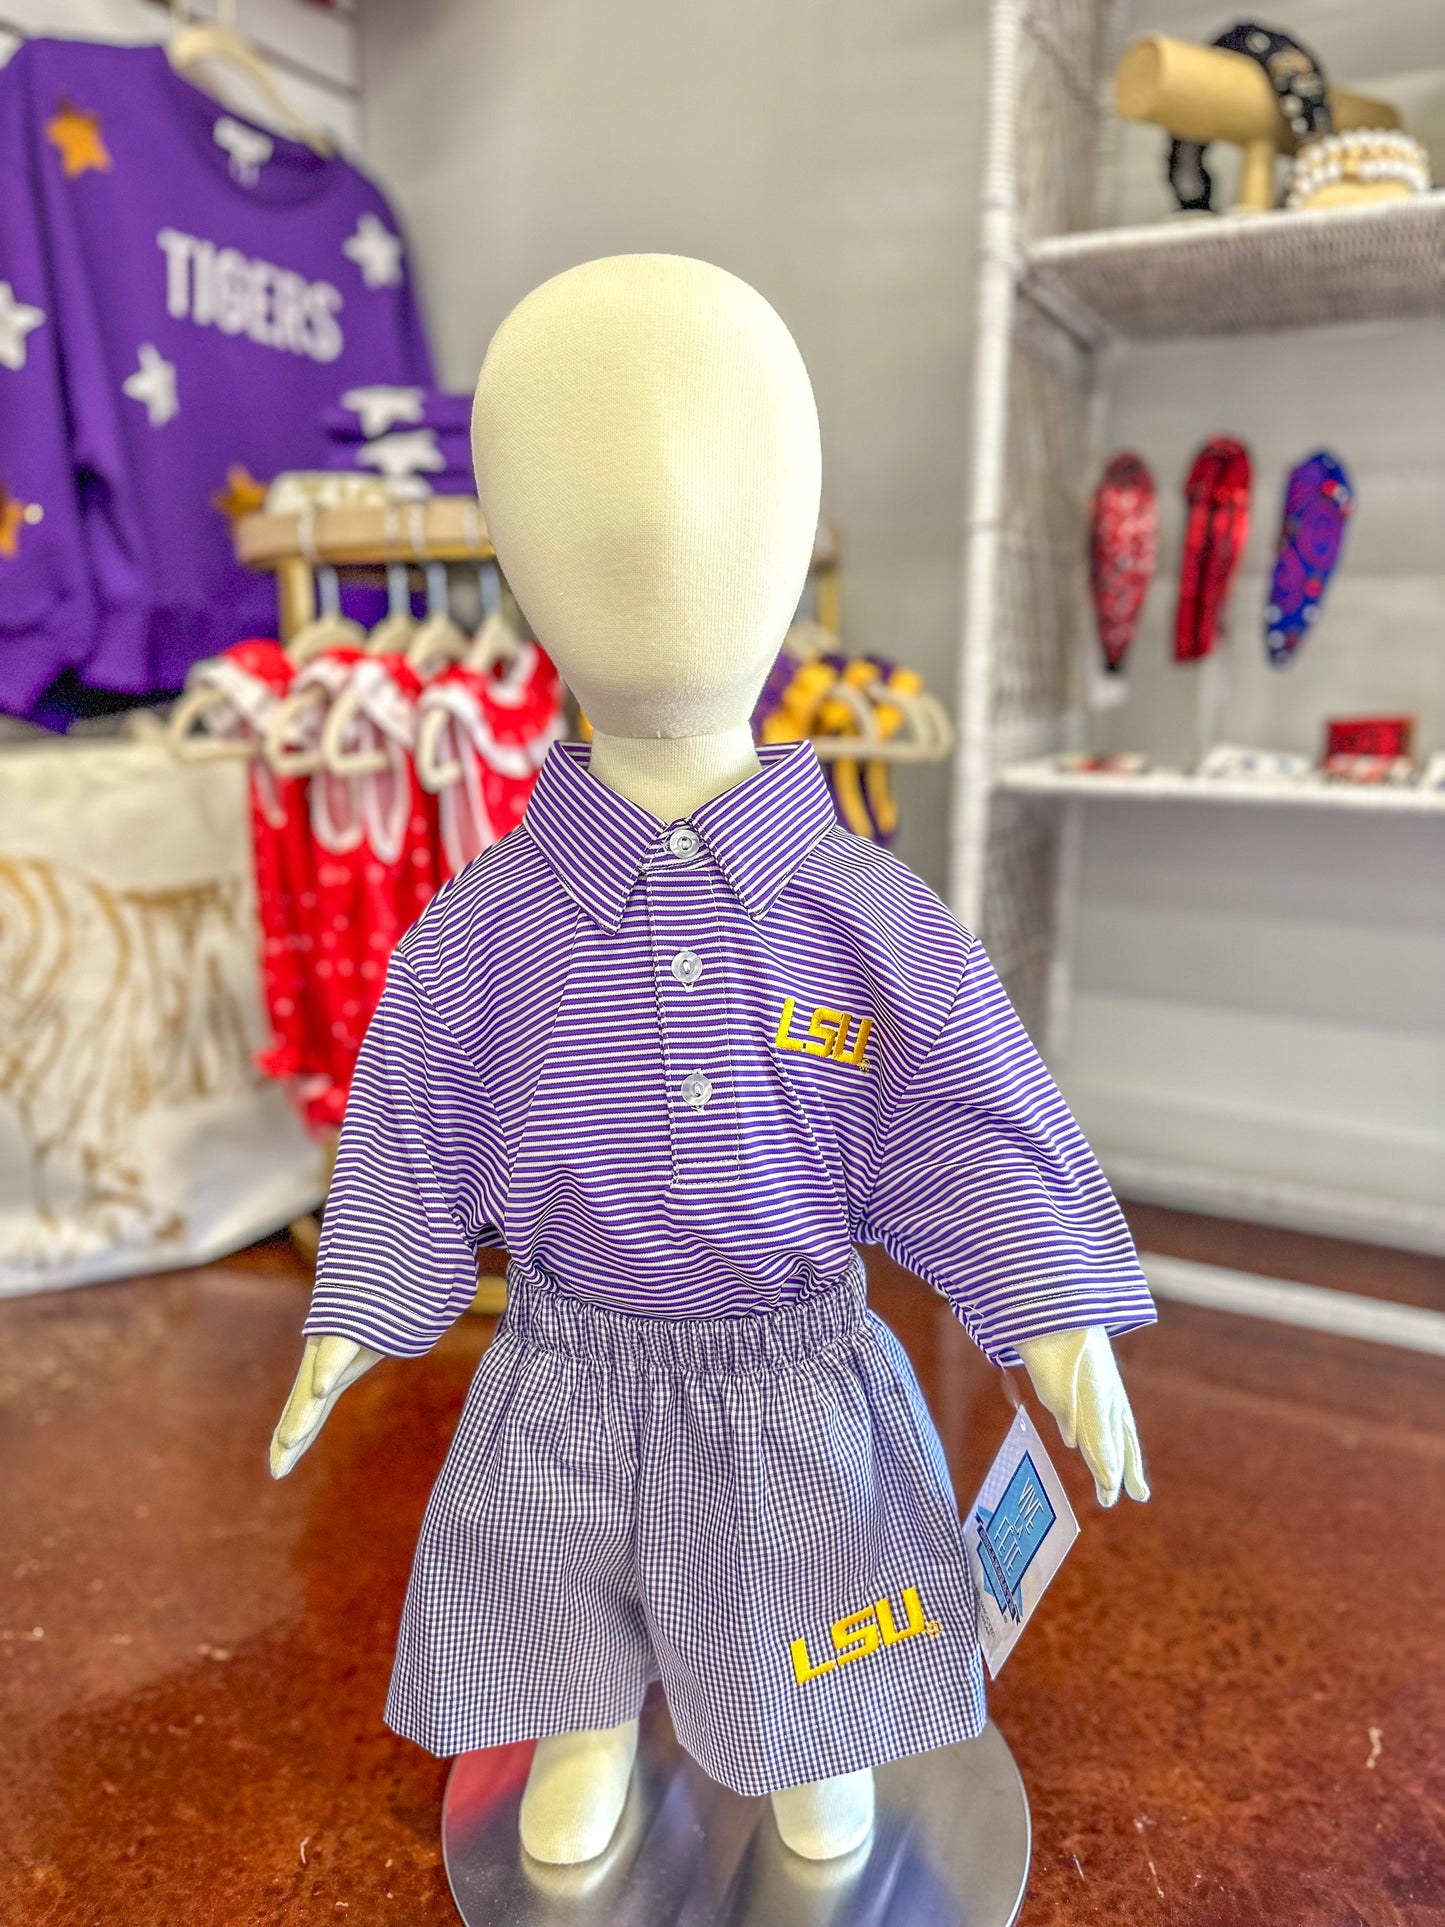 LSU Embroidered Gingham Pull On Shorts